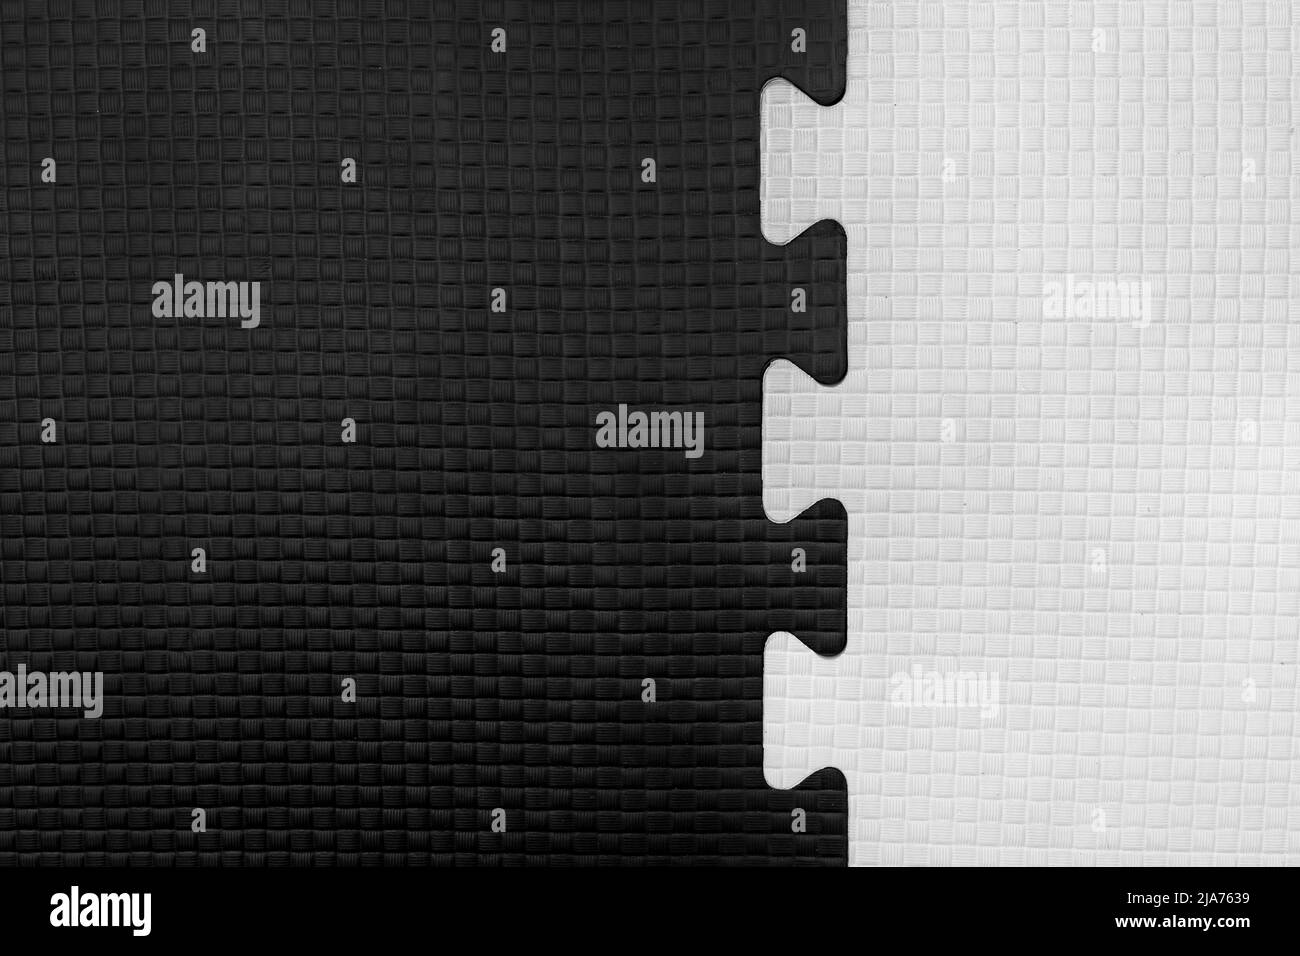 White and Black Puzzle Rubber Mat Pattern Gym Floor Background Abstract Design. Stock Photo